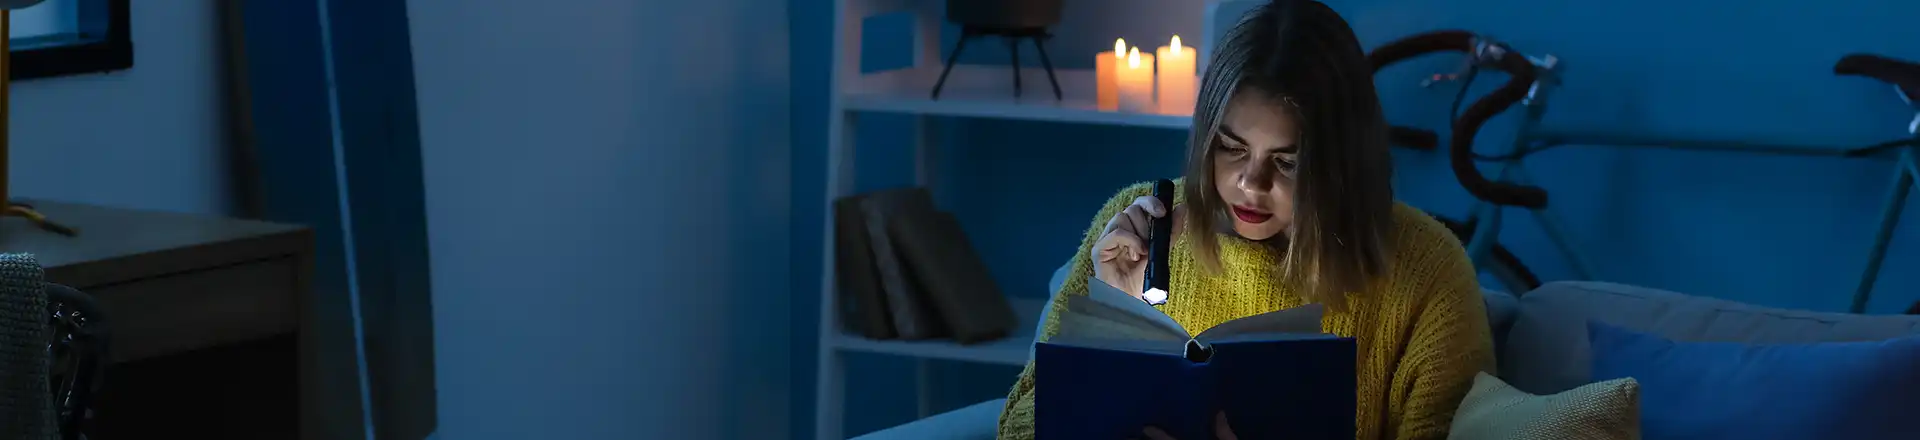 Girl reading book using torch